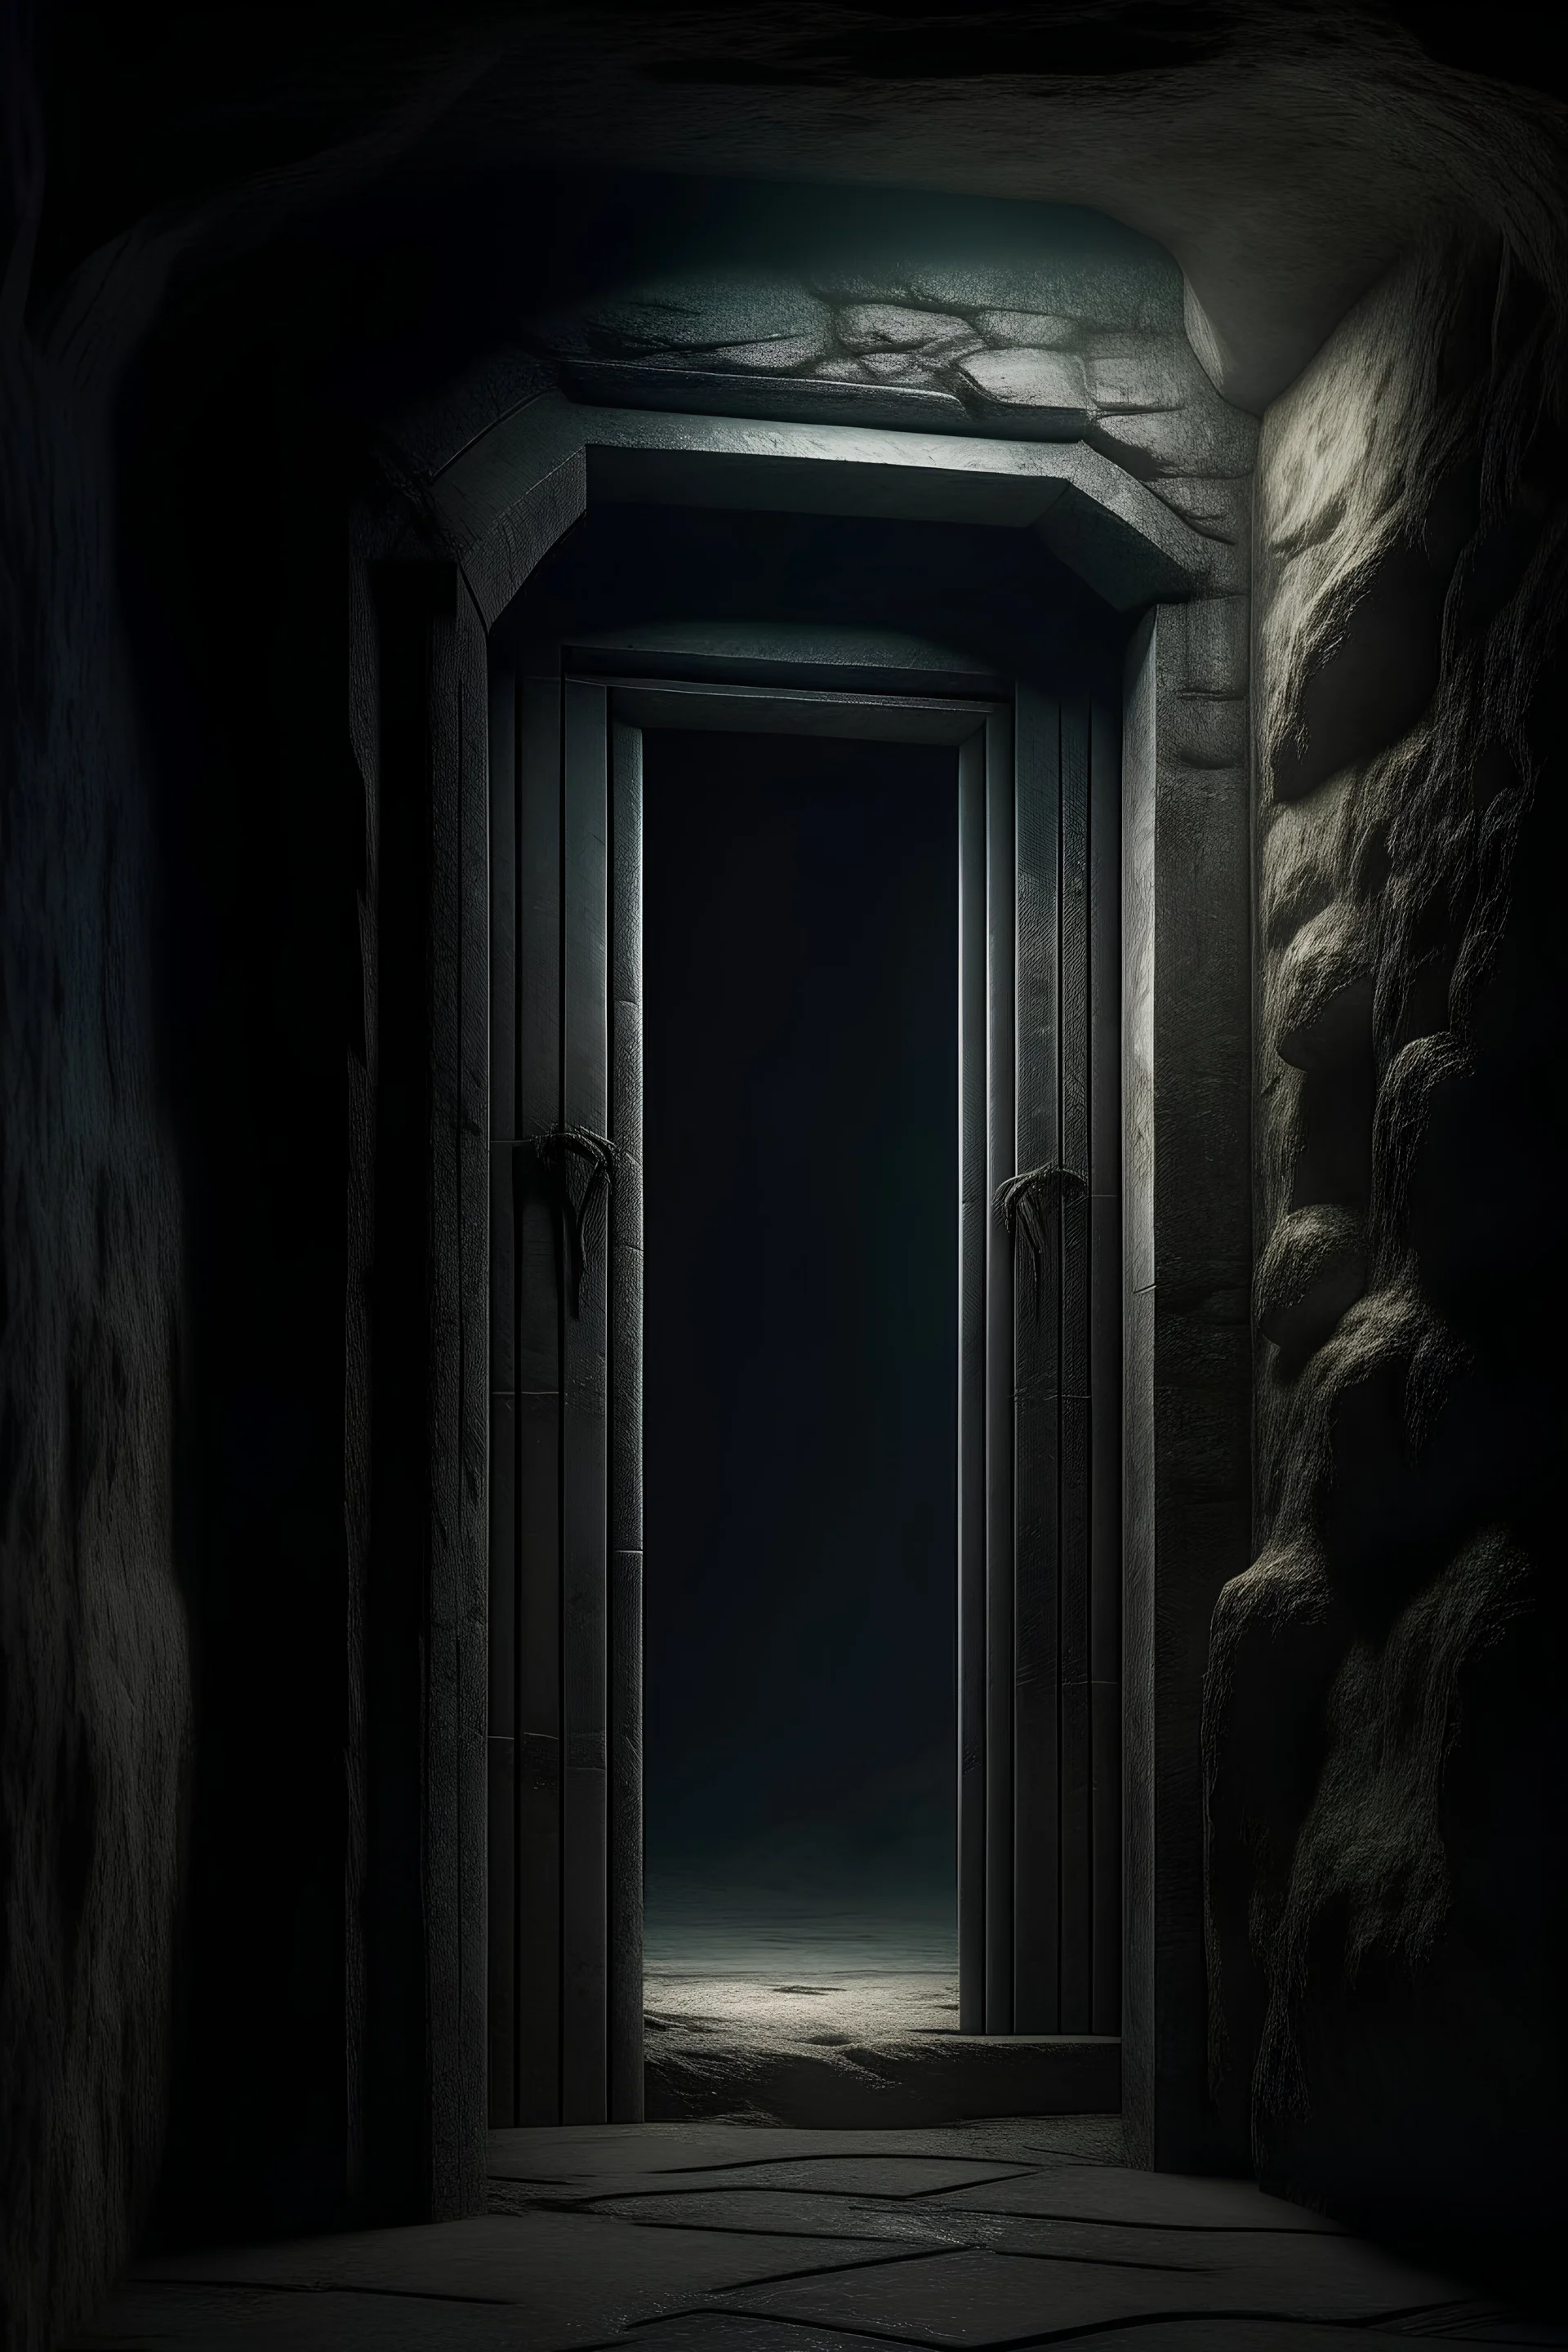 The odyssey, the Dark passage, A stone door open, stepped into this mysterious time and space.